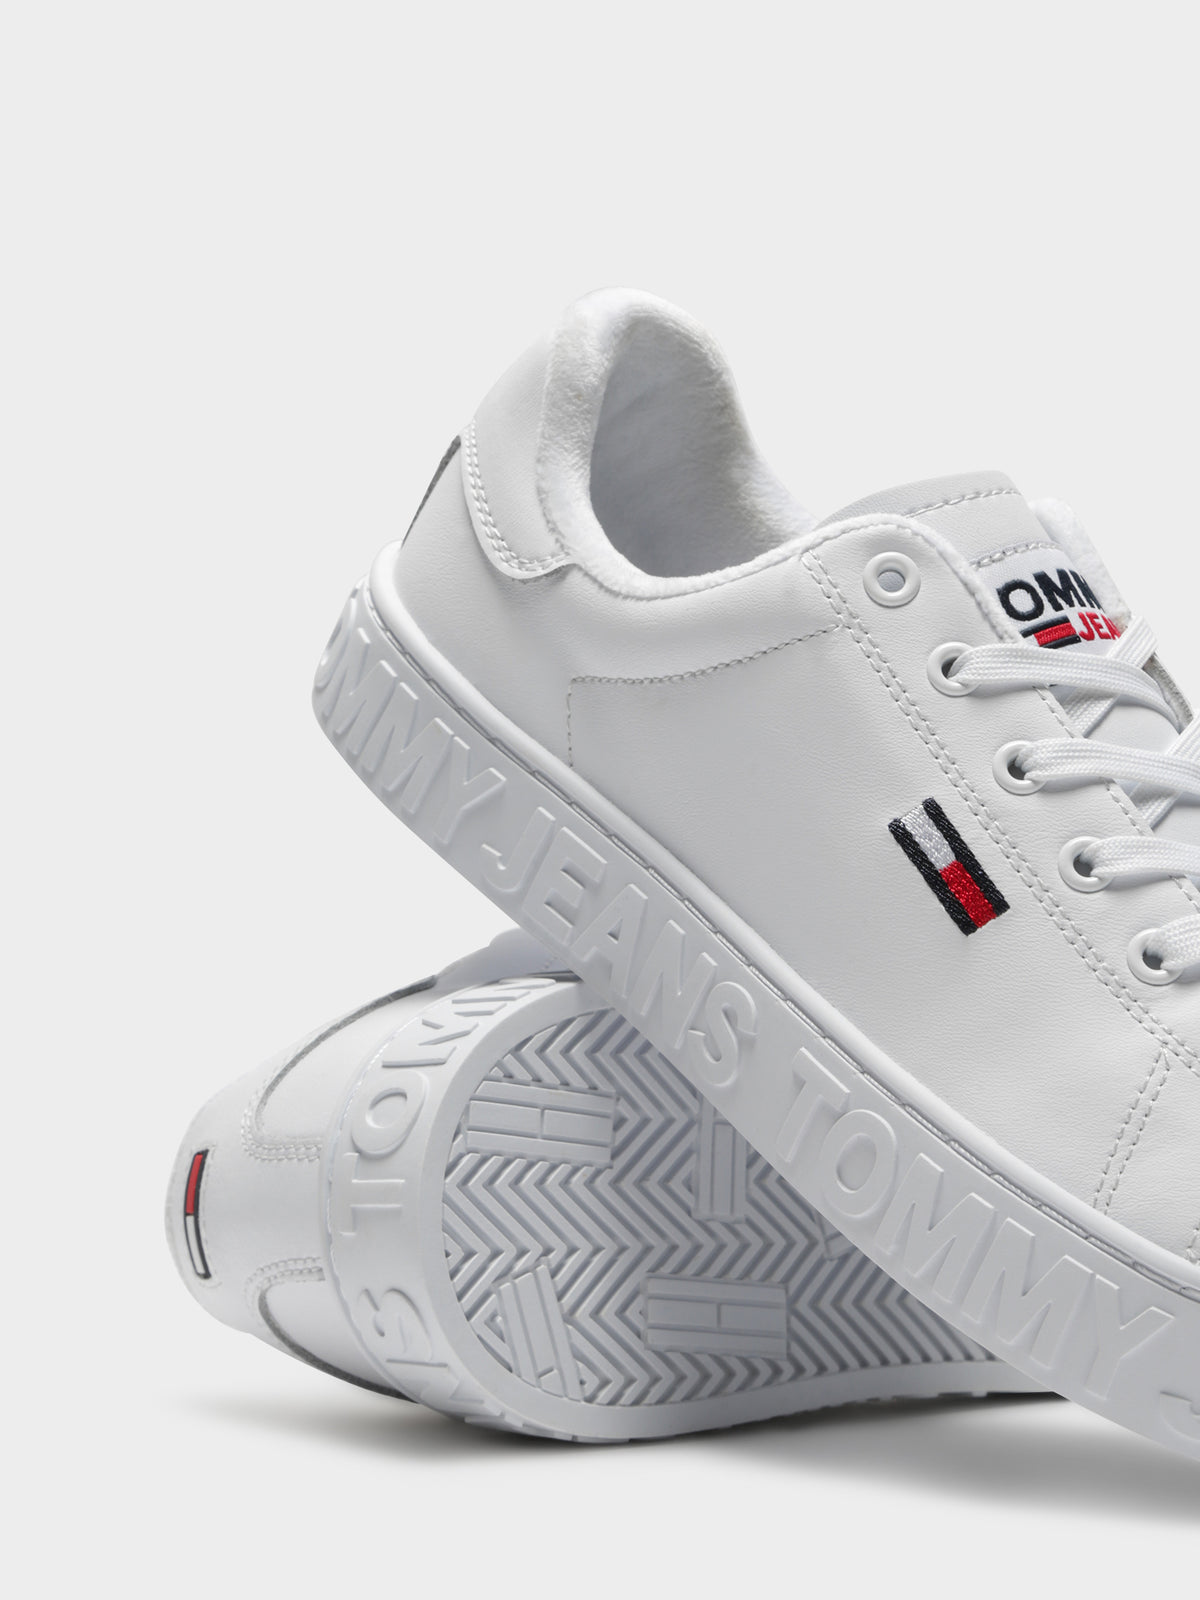 Cool Tommy Jeans Cupsole Sneakers in White